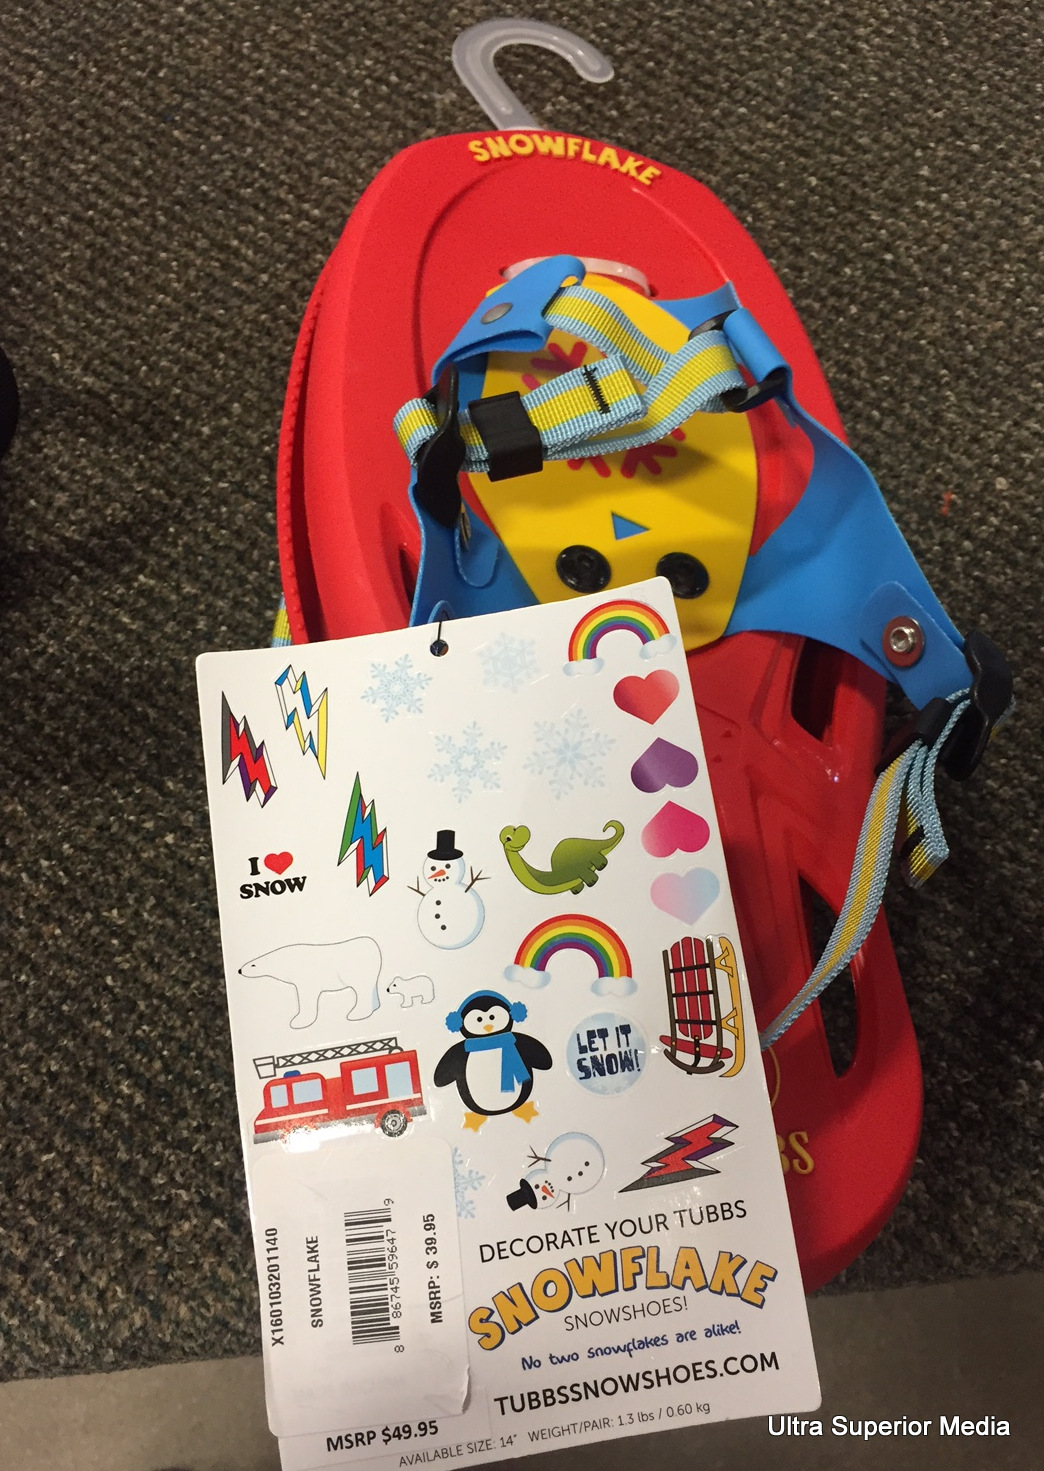 Start 'em Young! Snowshoes for Kids Two to Teens